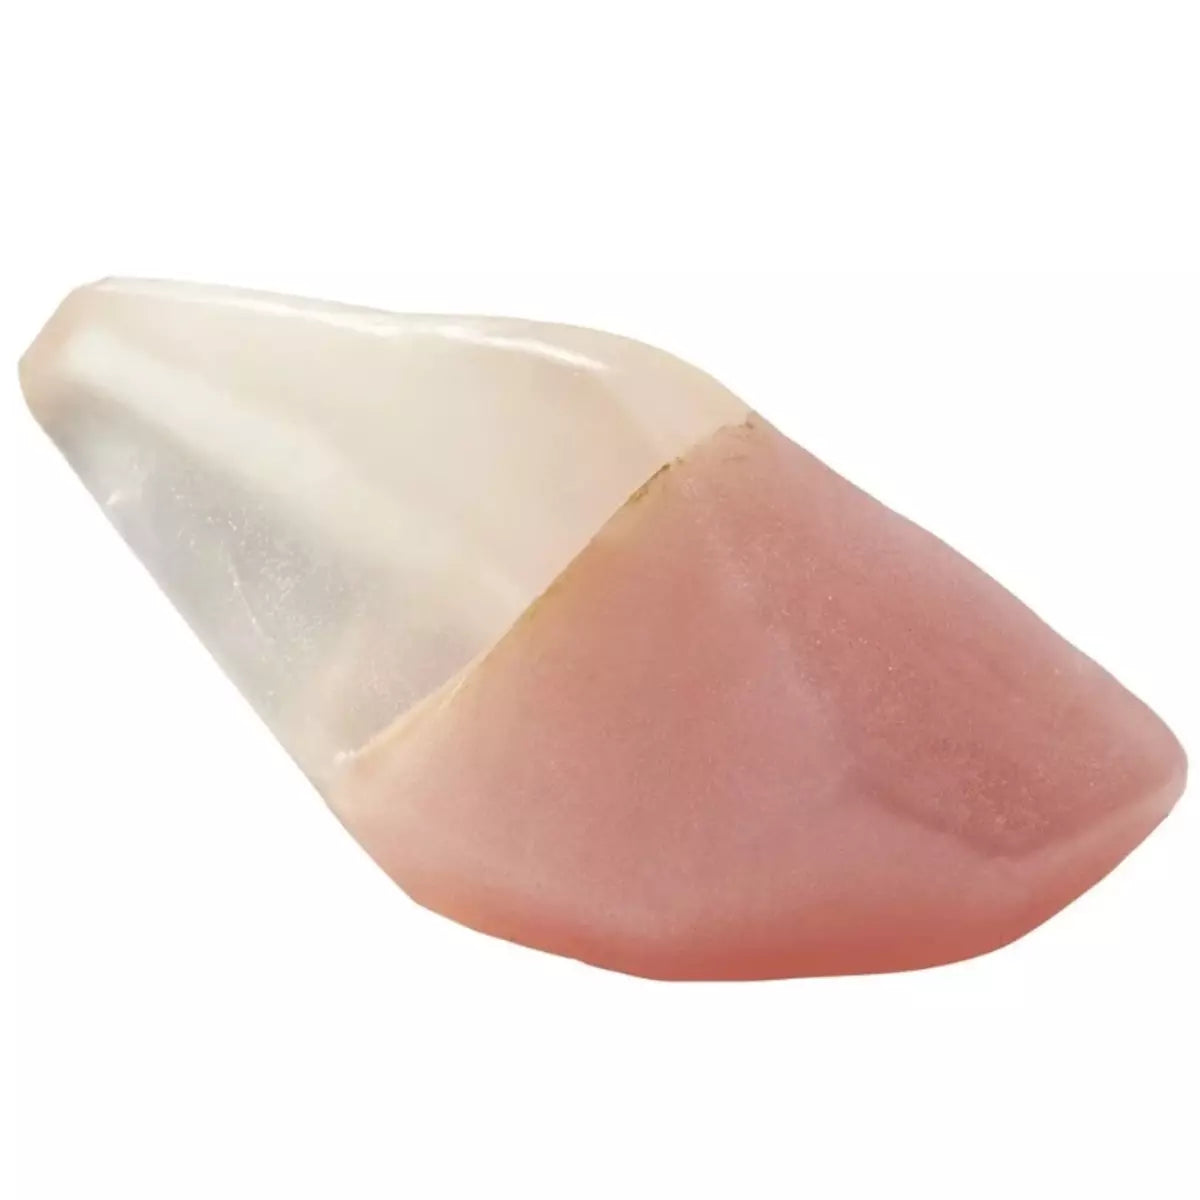 A beautiful piece of Crystal Soap - ROSE QUARTZ - Jasmine, a pink and white crystal, resting delicately on a pristine white background by Summer Salt Body.